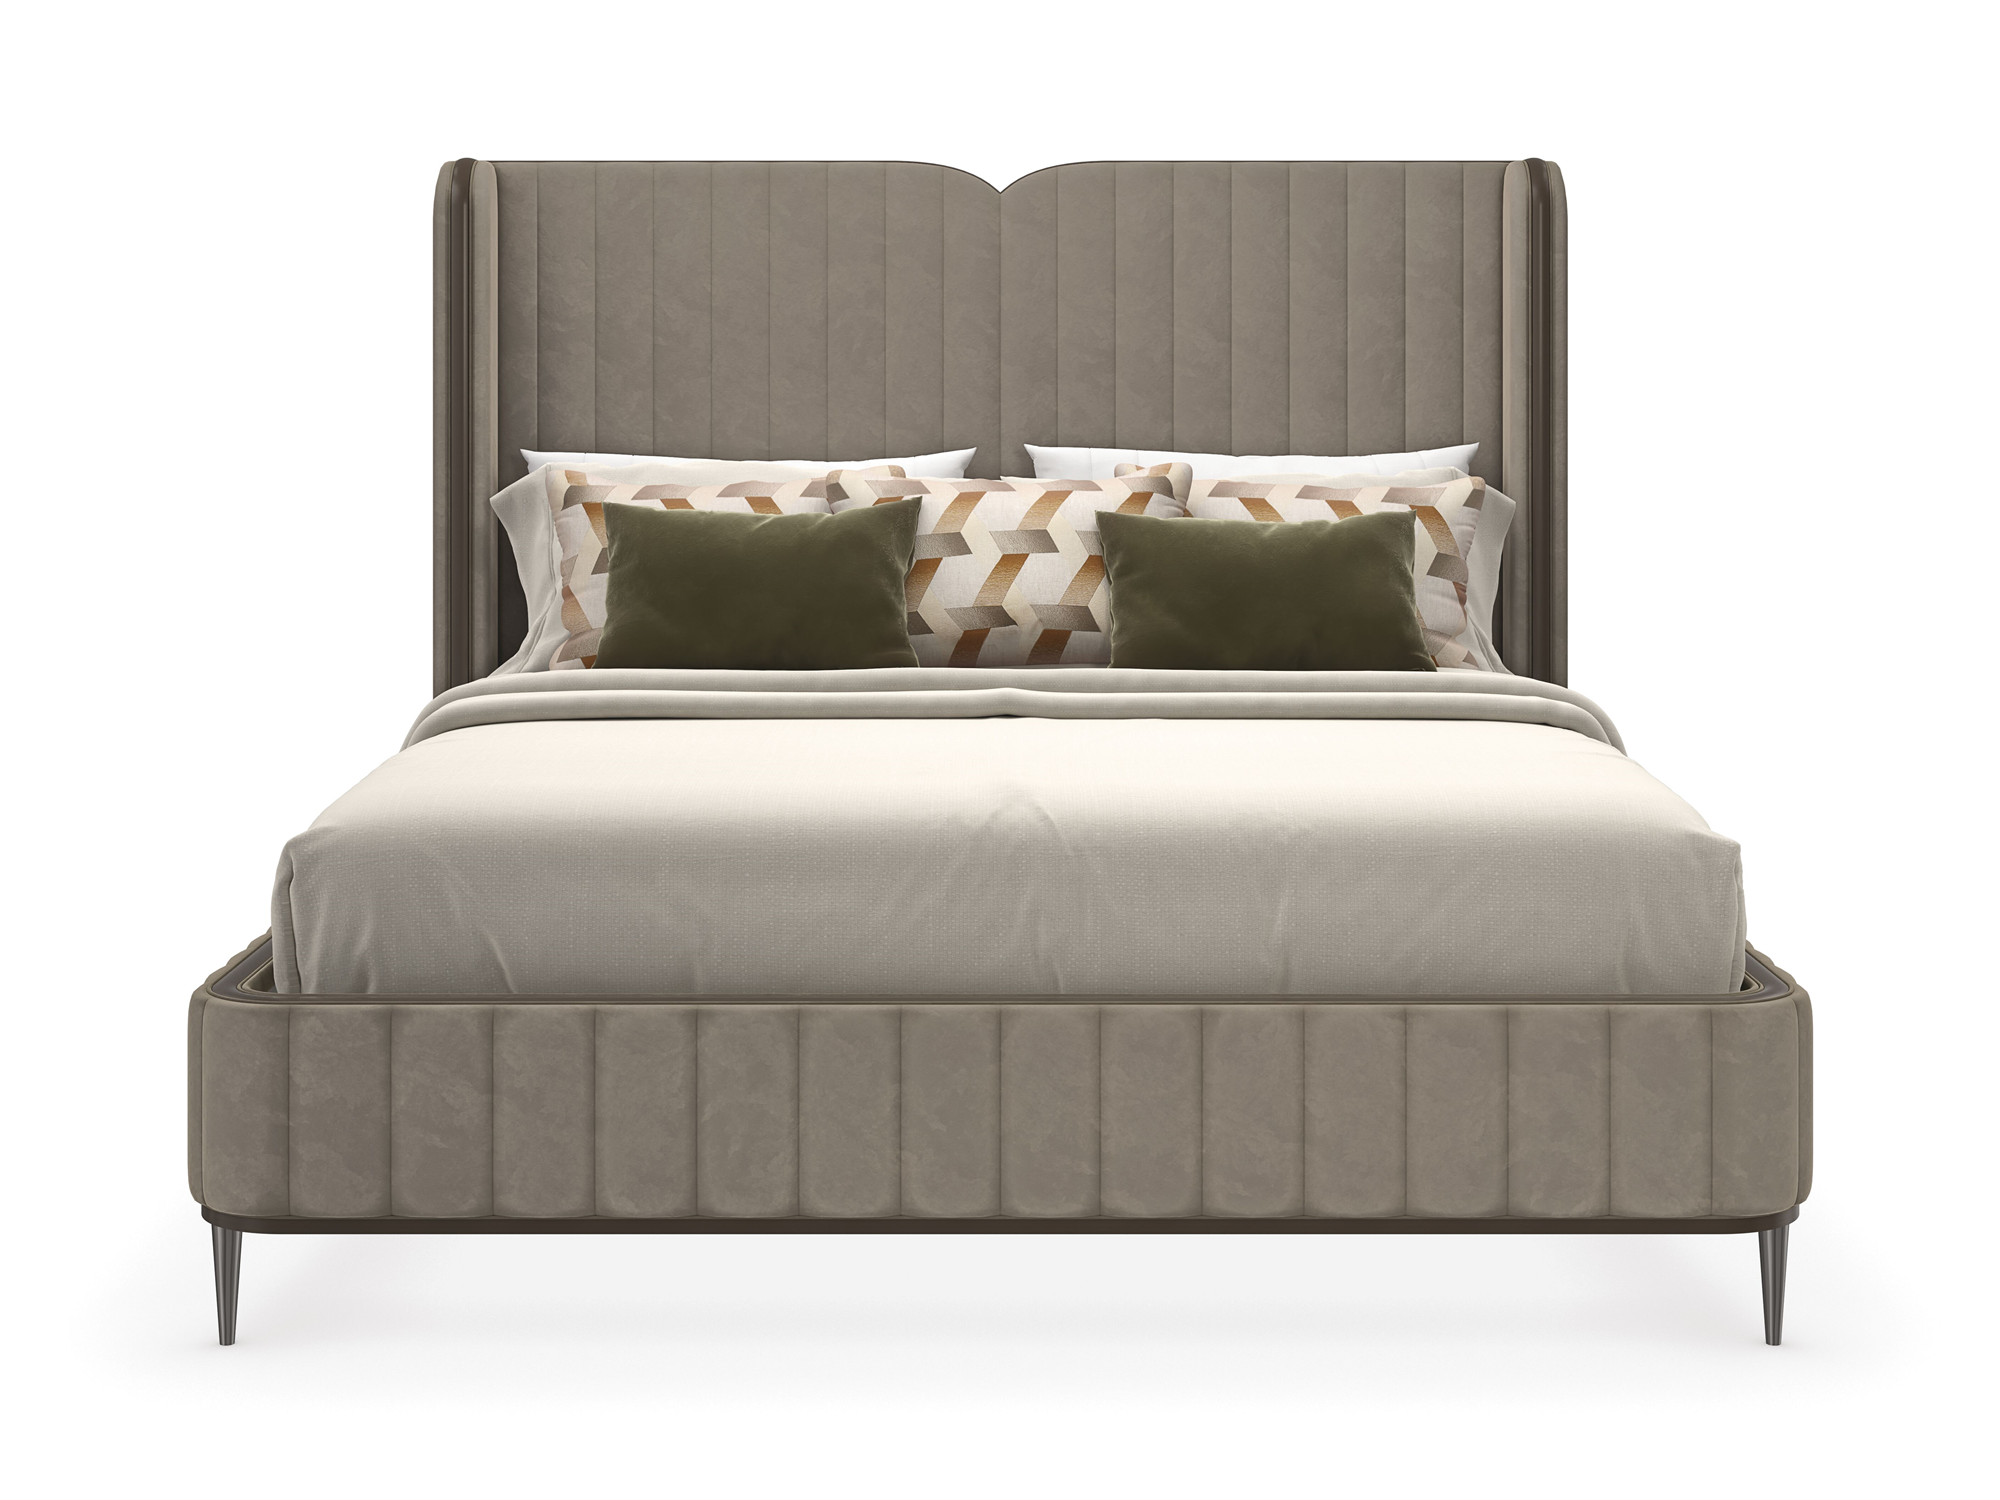 Babs Continuum Bed - Euro Living Furniture